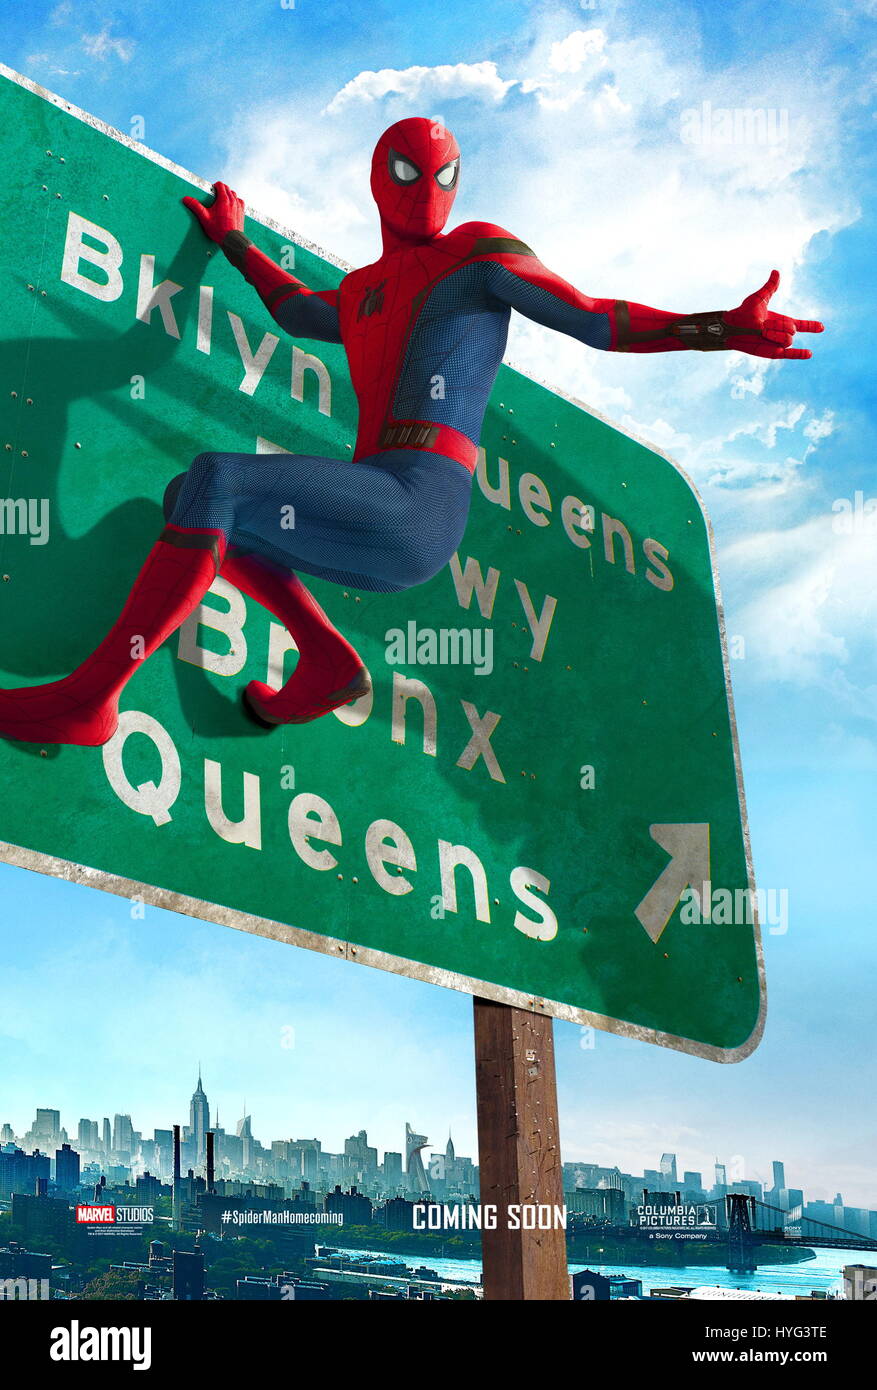 RELEASE DATE: July 7, 2017 TITLE: Spider-Man: Homecoming STUDIO: Columbia Pictures DIRECTOR: Jon Watts PLOT: A young Peter Parker/Spider-Man begins to navigate his newfound identity as the web-slinging superhero STARRING: Tom Holland is Spider-Man Poster Art (Credit: © Columbia Pictures/Entertainment Pictures) Stock Photo